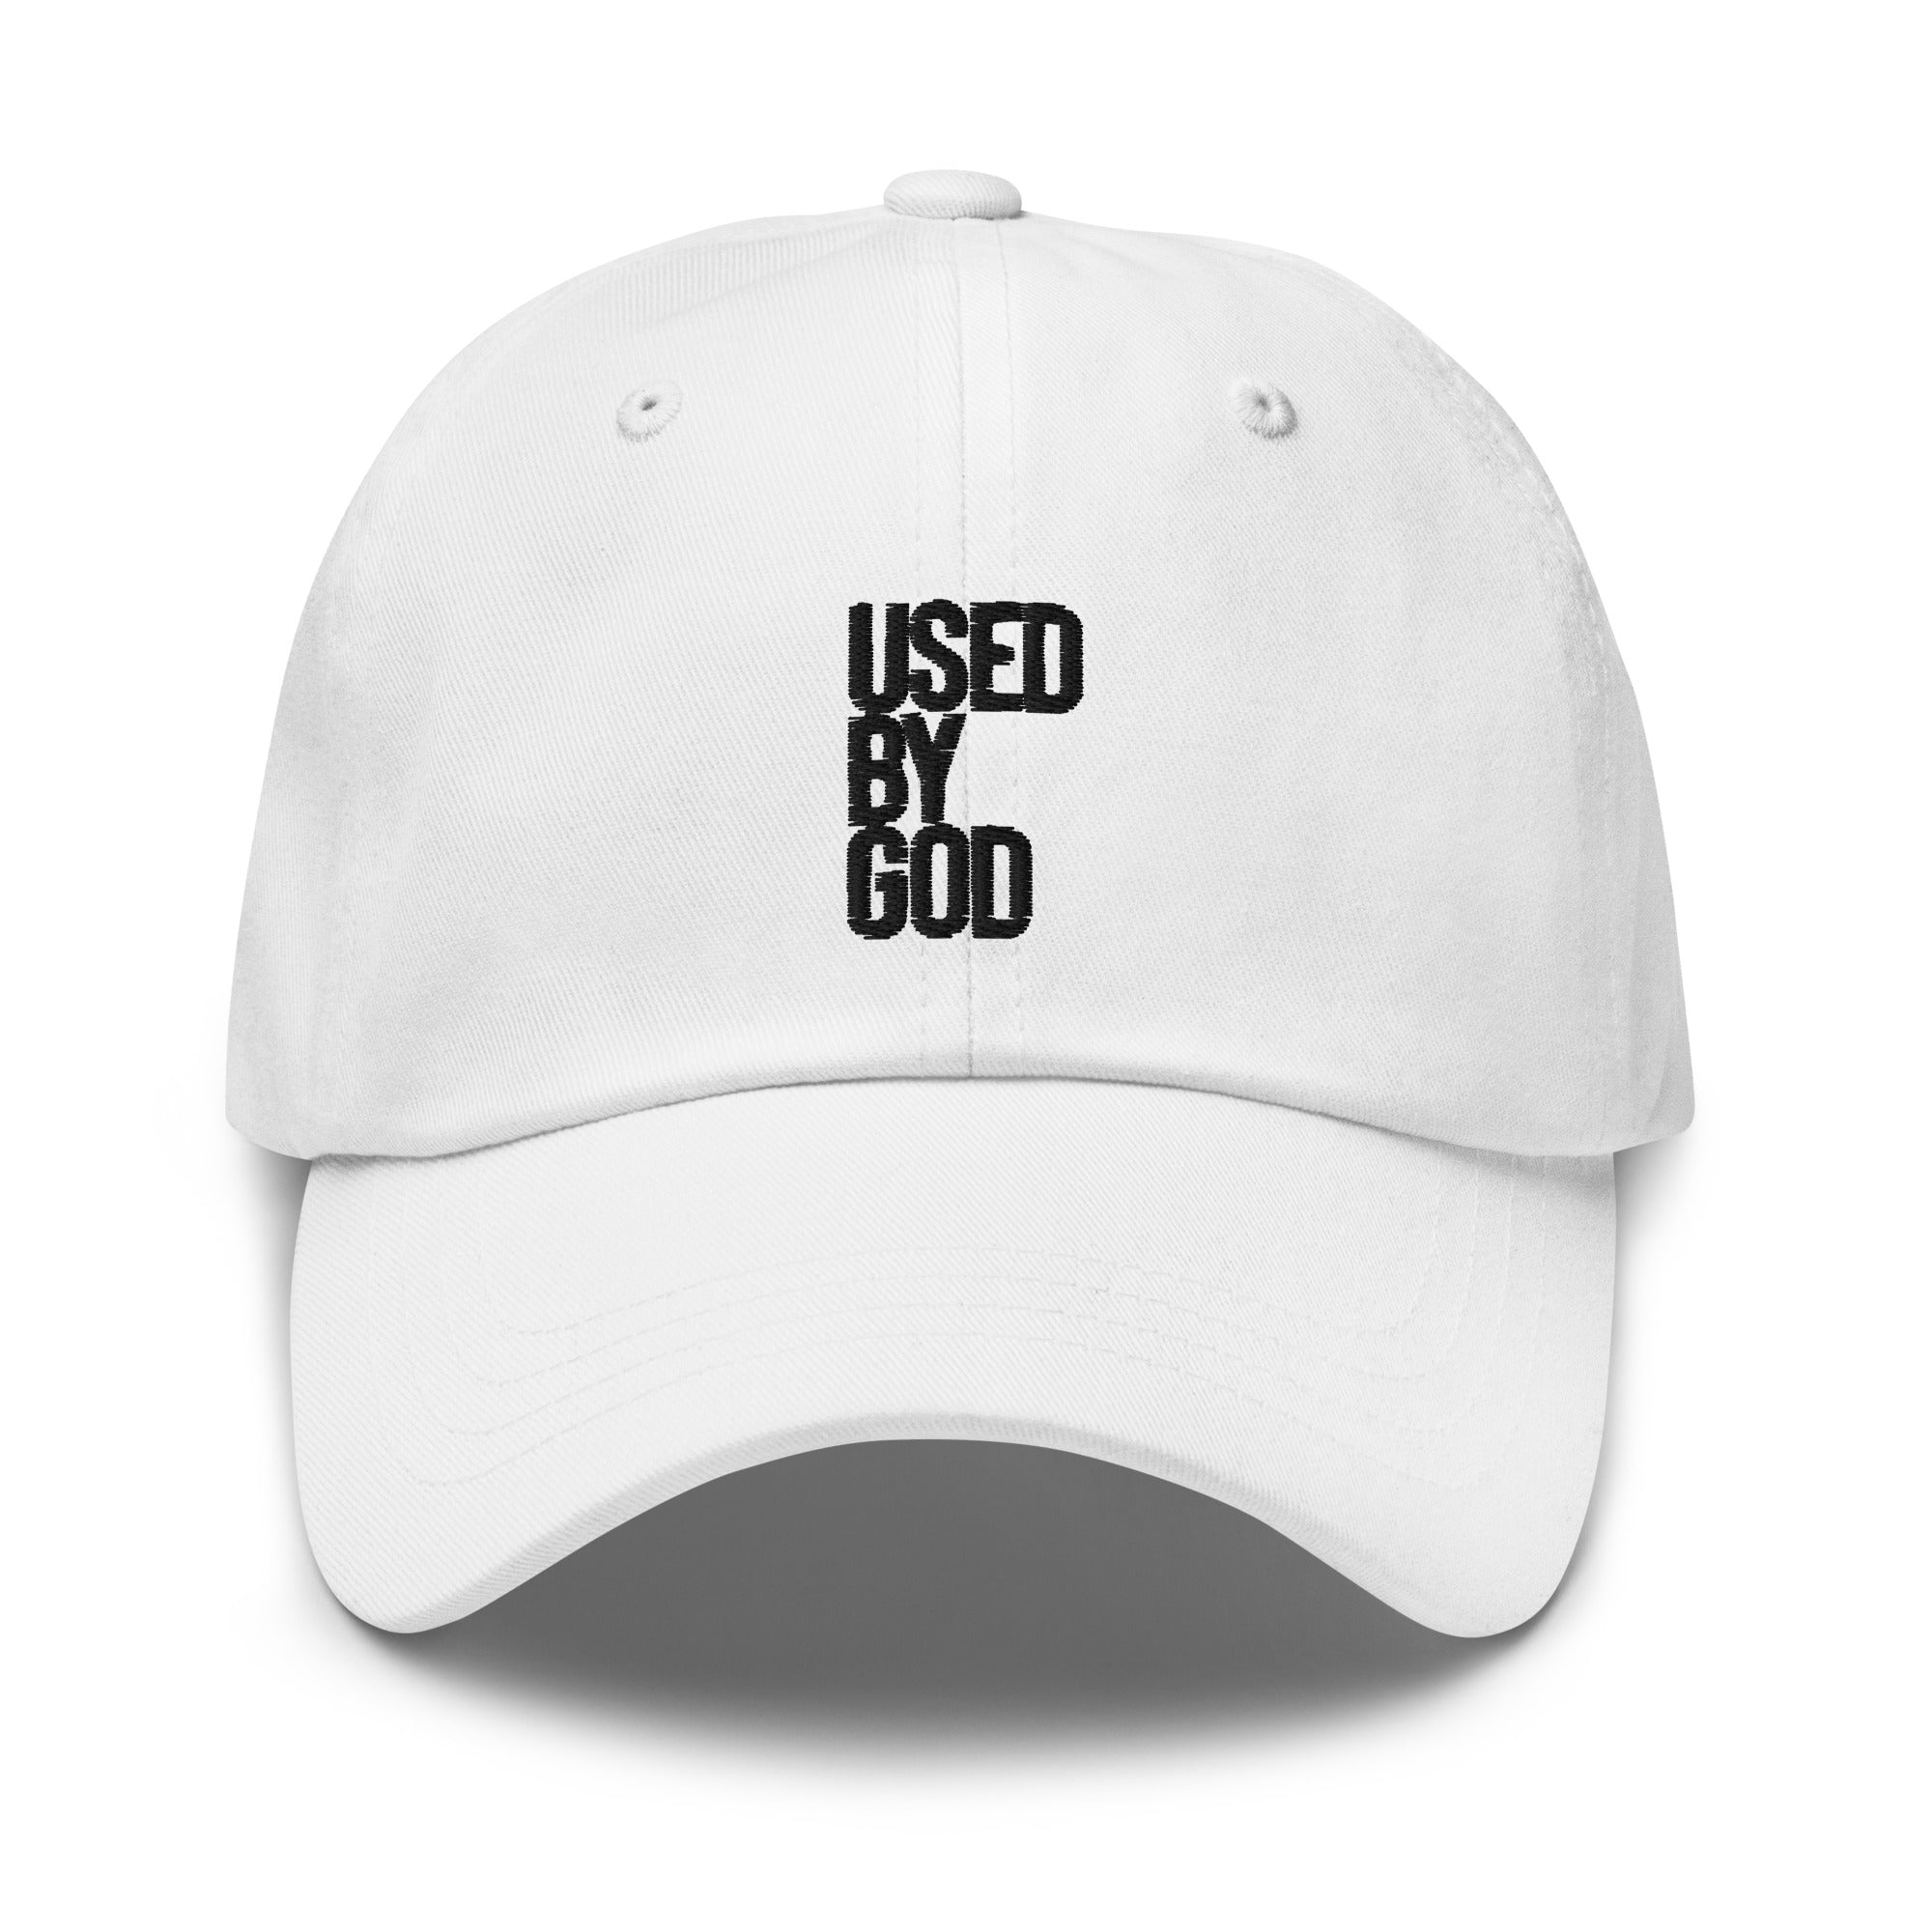 UBG Logo B&W Dad Hat, Used By God, Used By God Clothing, Christian Apparel, Christian Hats, Christian T-Shirts, Christian Clothing, God Shirts, Christian Sweatshirts, God Clothing, Jesus Hoodie, Jesus Clothes, God Is Dope, Art Of Homage, Red Letter Clothing, Elevated Faith, Active Faith Sports, Beacon Threads, God The Father Apparel